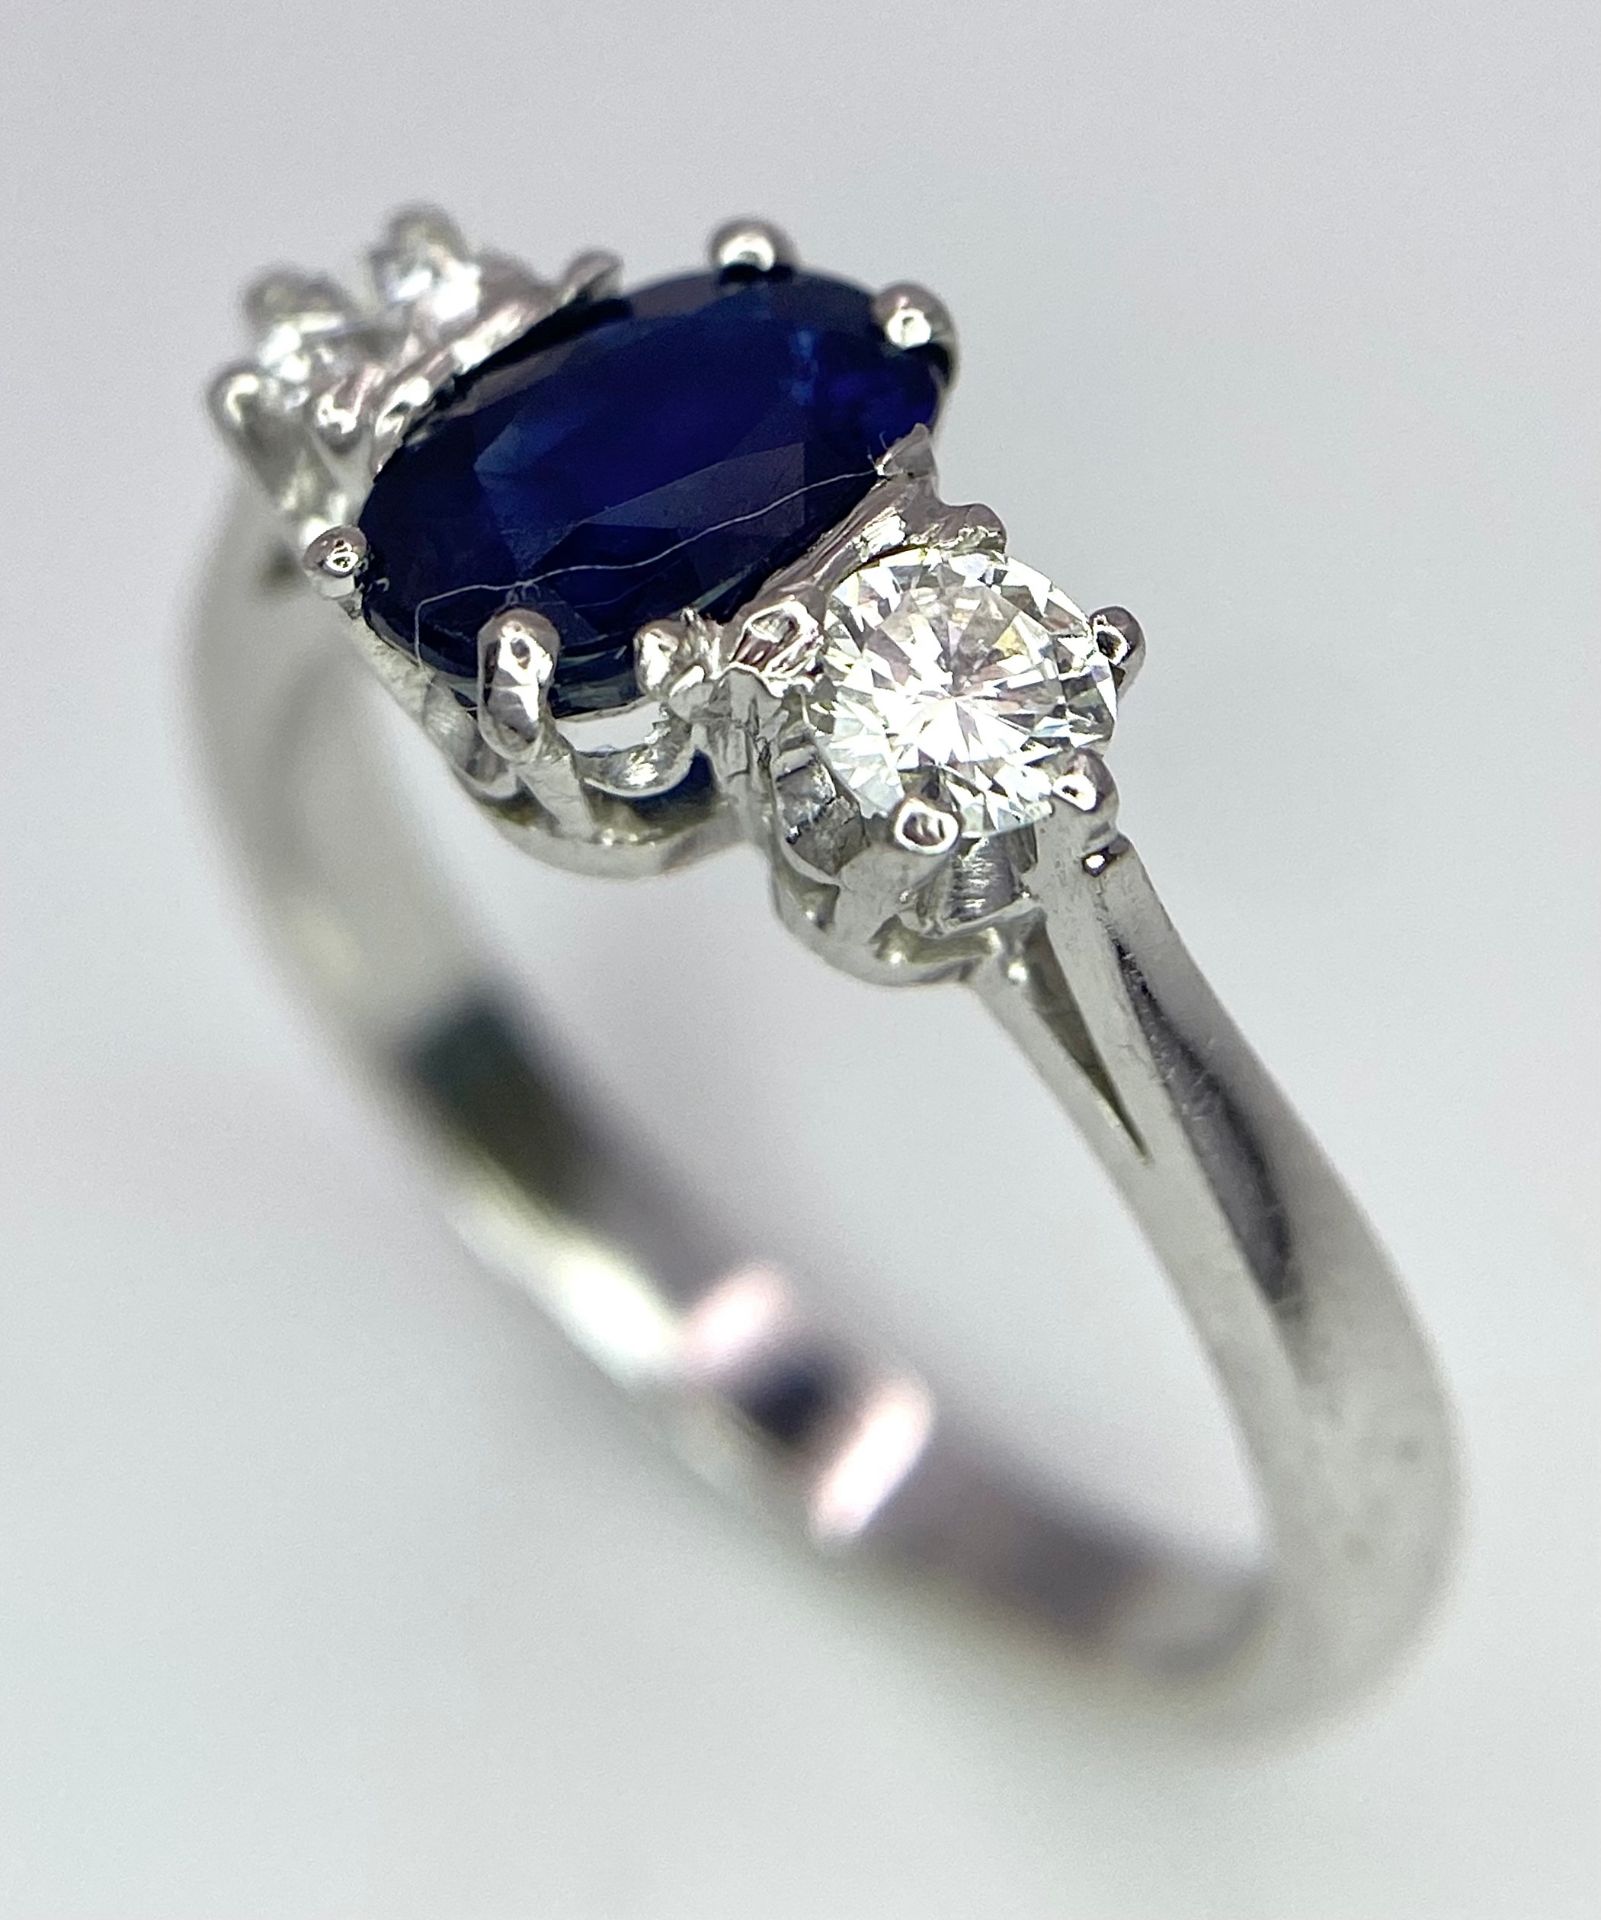 AN 18K WHITE GOLD, DIAMOND AND SAPPHIRE 3 STONE RING. OVAL BLUE SAPPHIRE - 0.75CT AND 0.30CT OF - Bild 2 aus 6